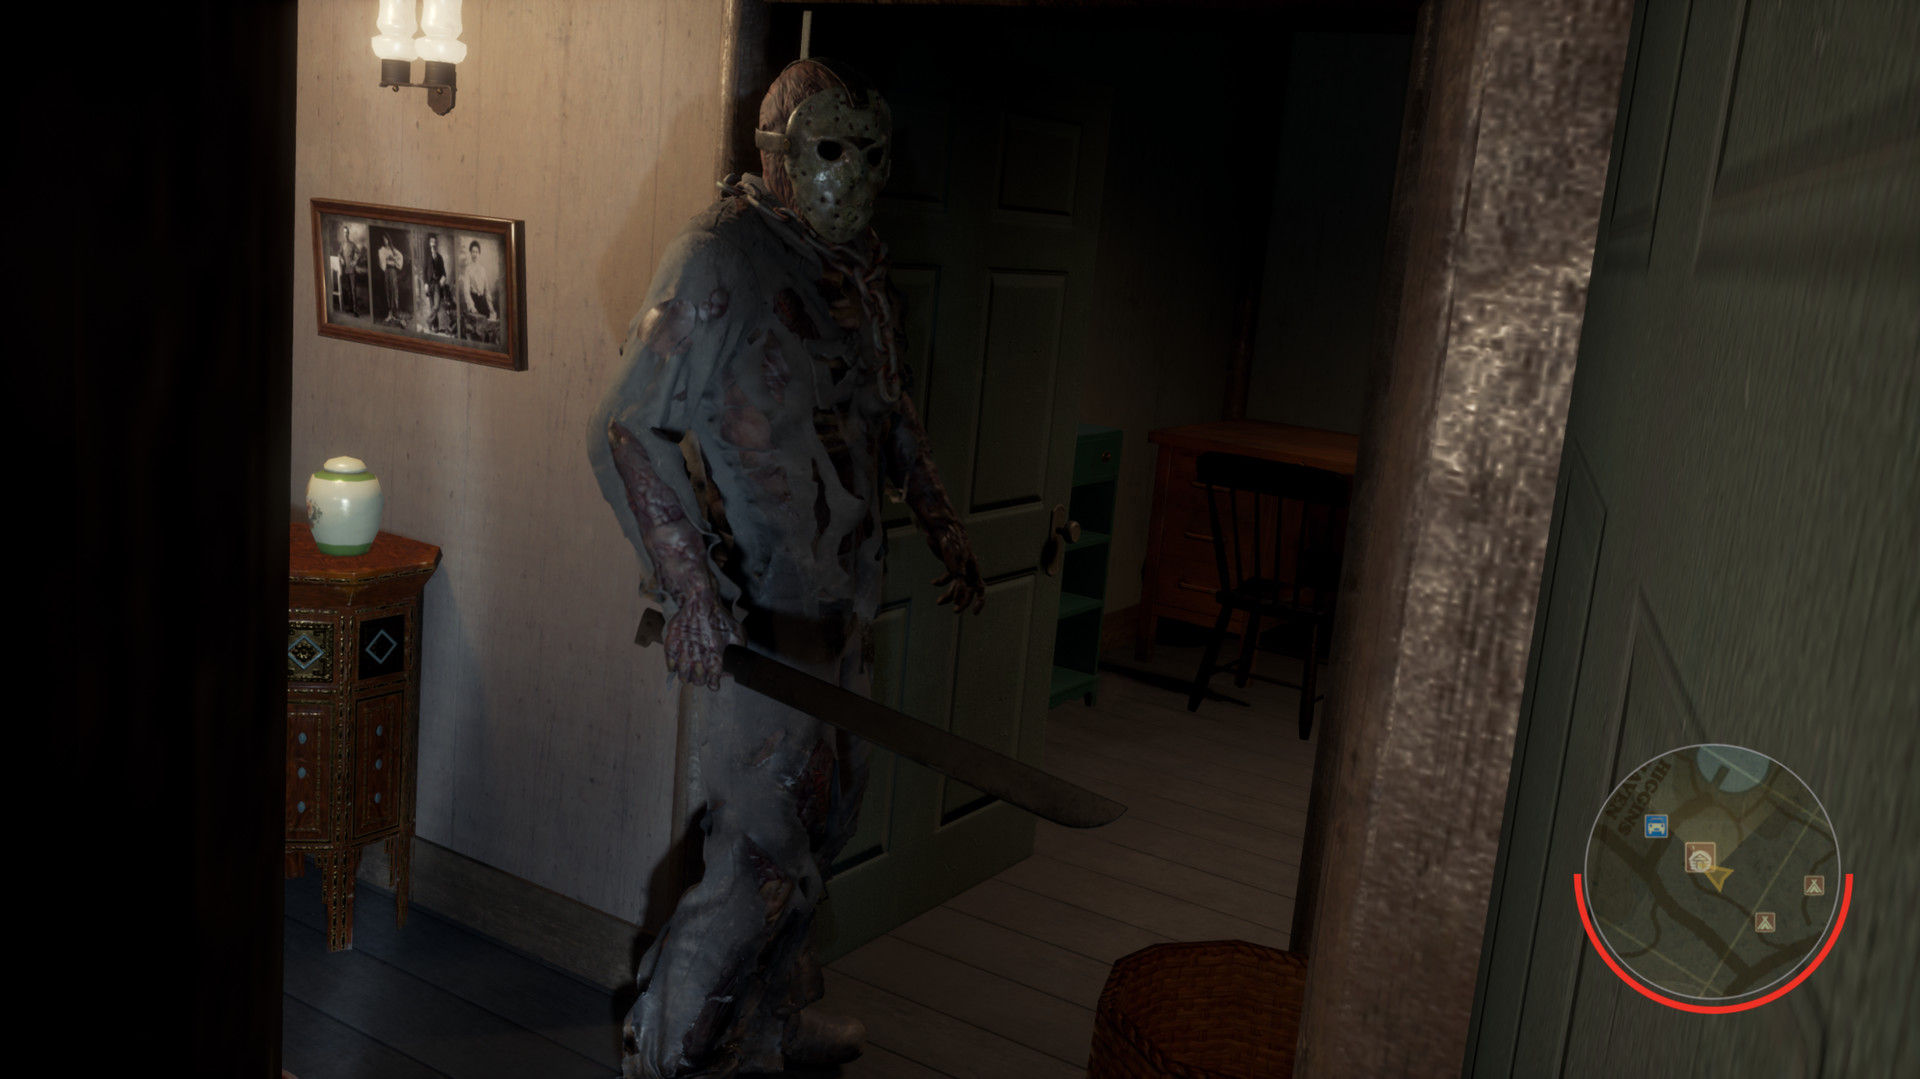 FRIDAY THE 13TH GAME BY IELLO GAMESBNIEL00037 